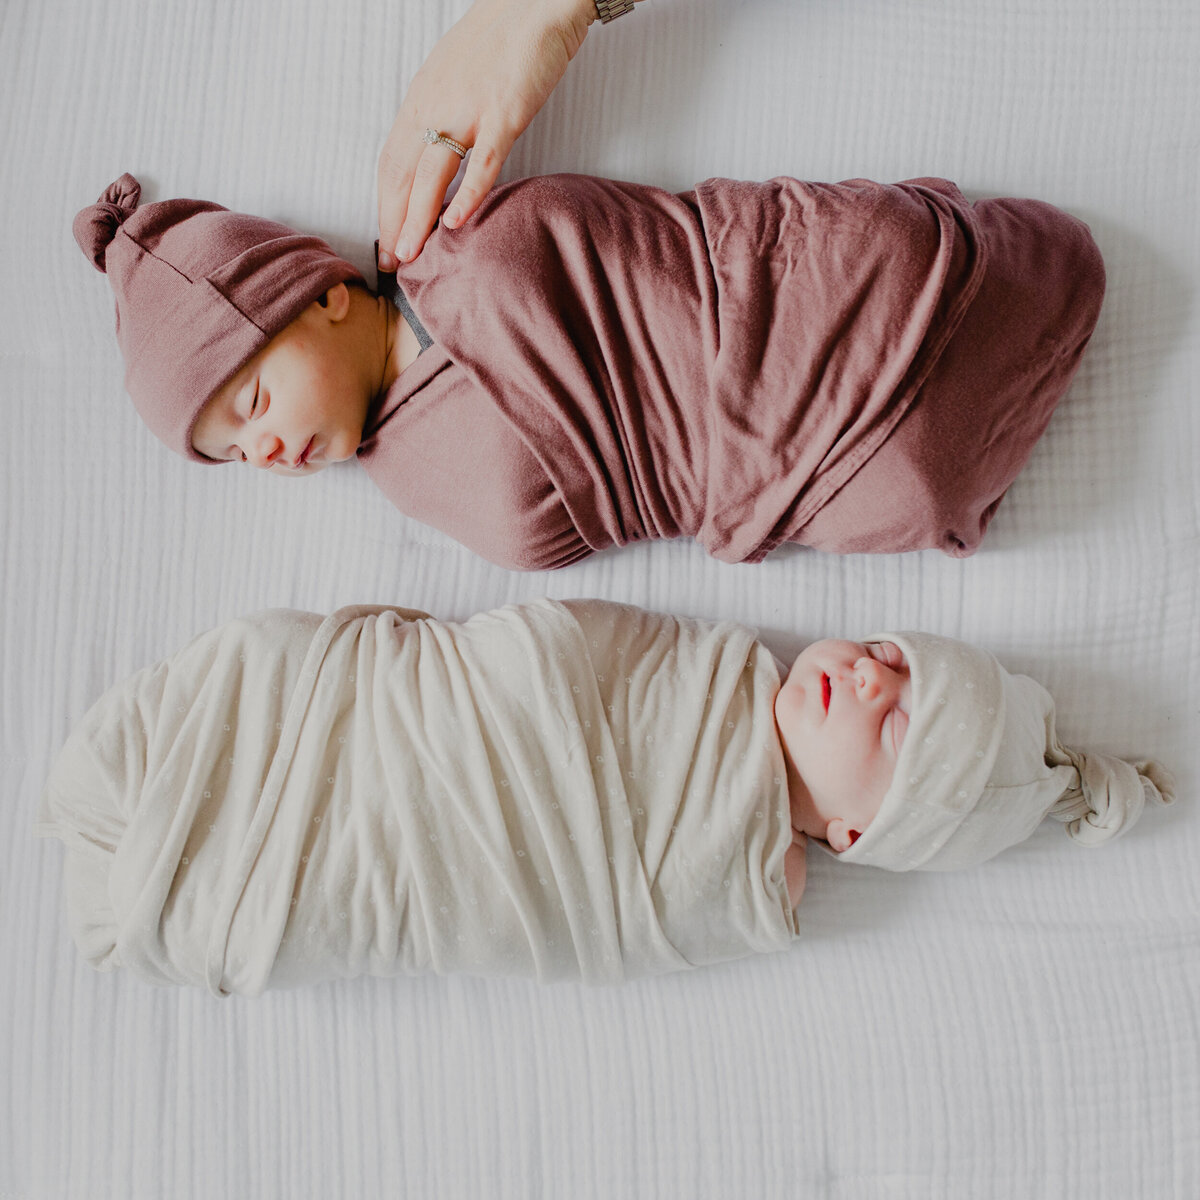 Overhead photo of baby in swaddle. Two babies actually! One twin is in a mauve swaddle and the other is in taupe. The mom's hand reaches in from the top of the photo and rests on one of the babies.